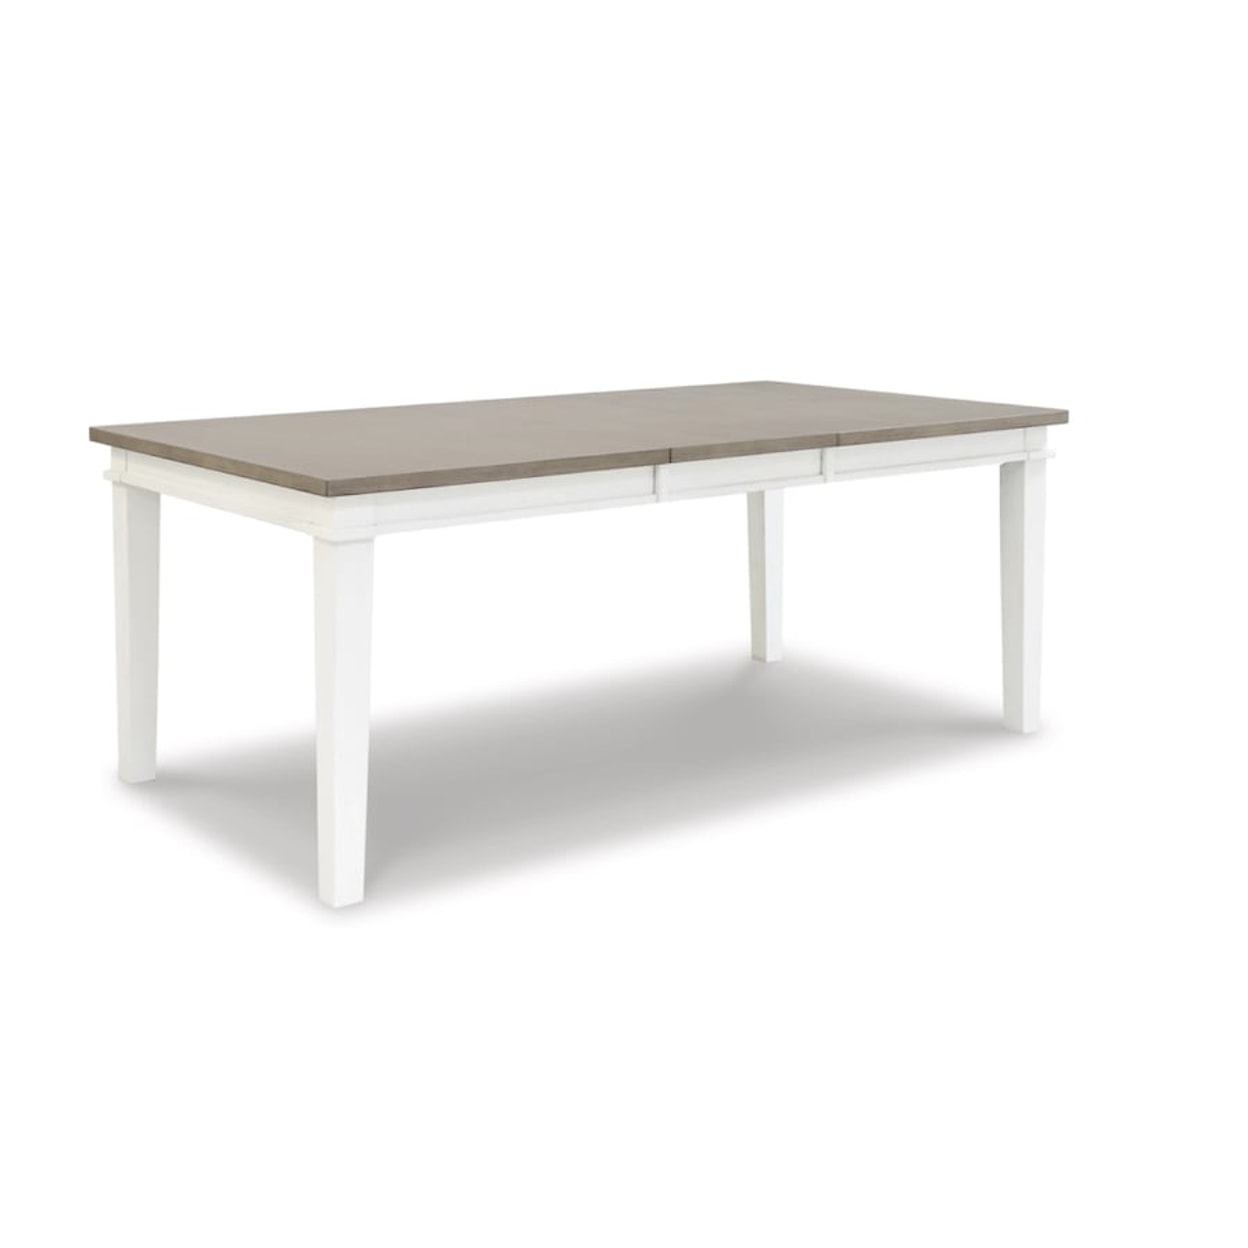 Signature Design by Ashley Nollicott Dining Table